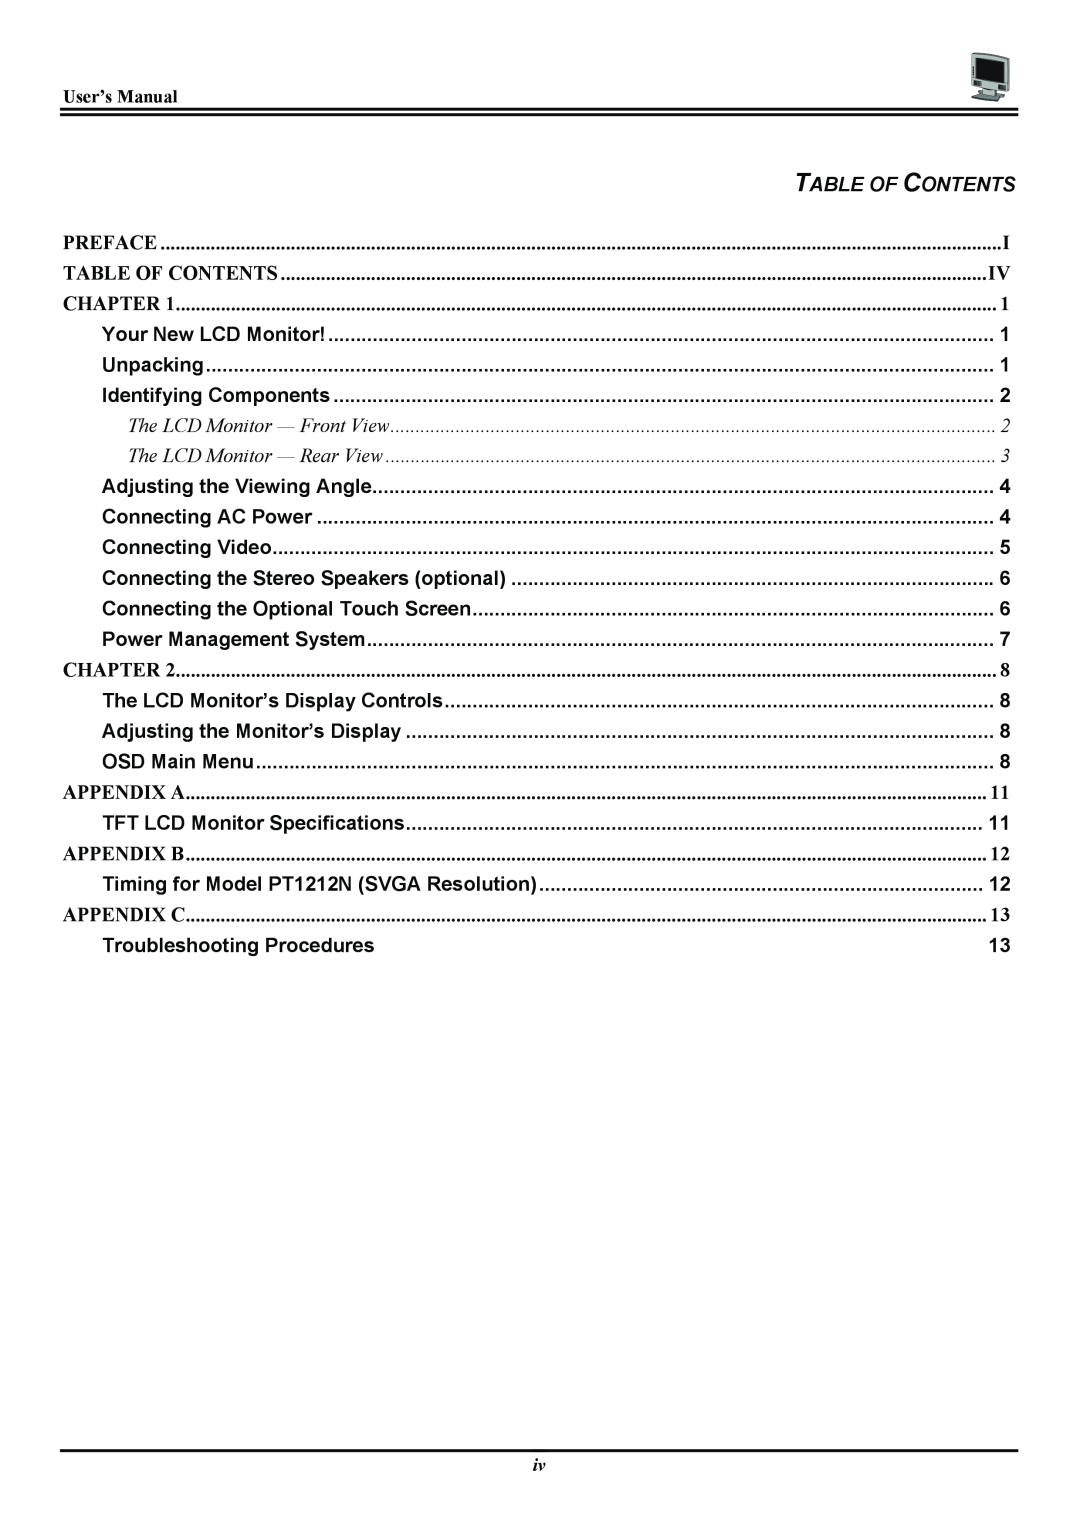 Planar PL120, PT120 manual Troubleshooting Procedures, Table Of Contents, User’s Manual 